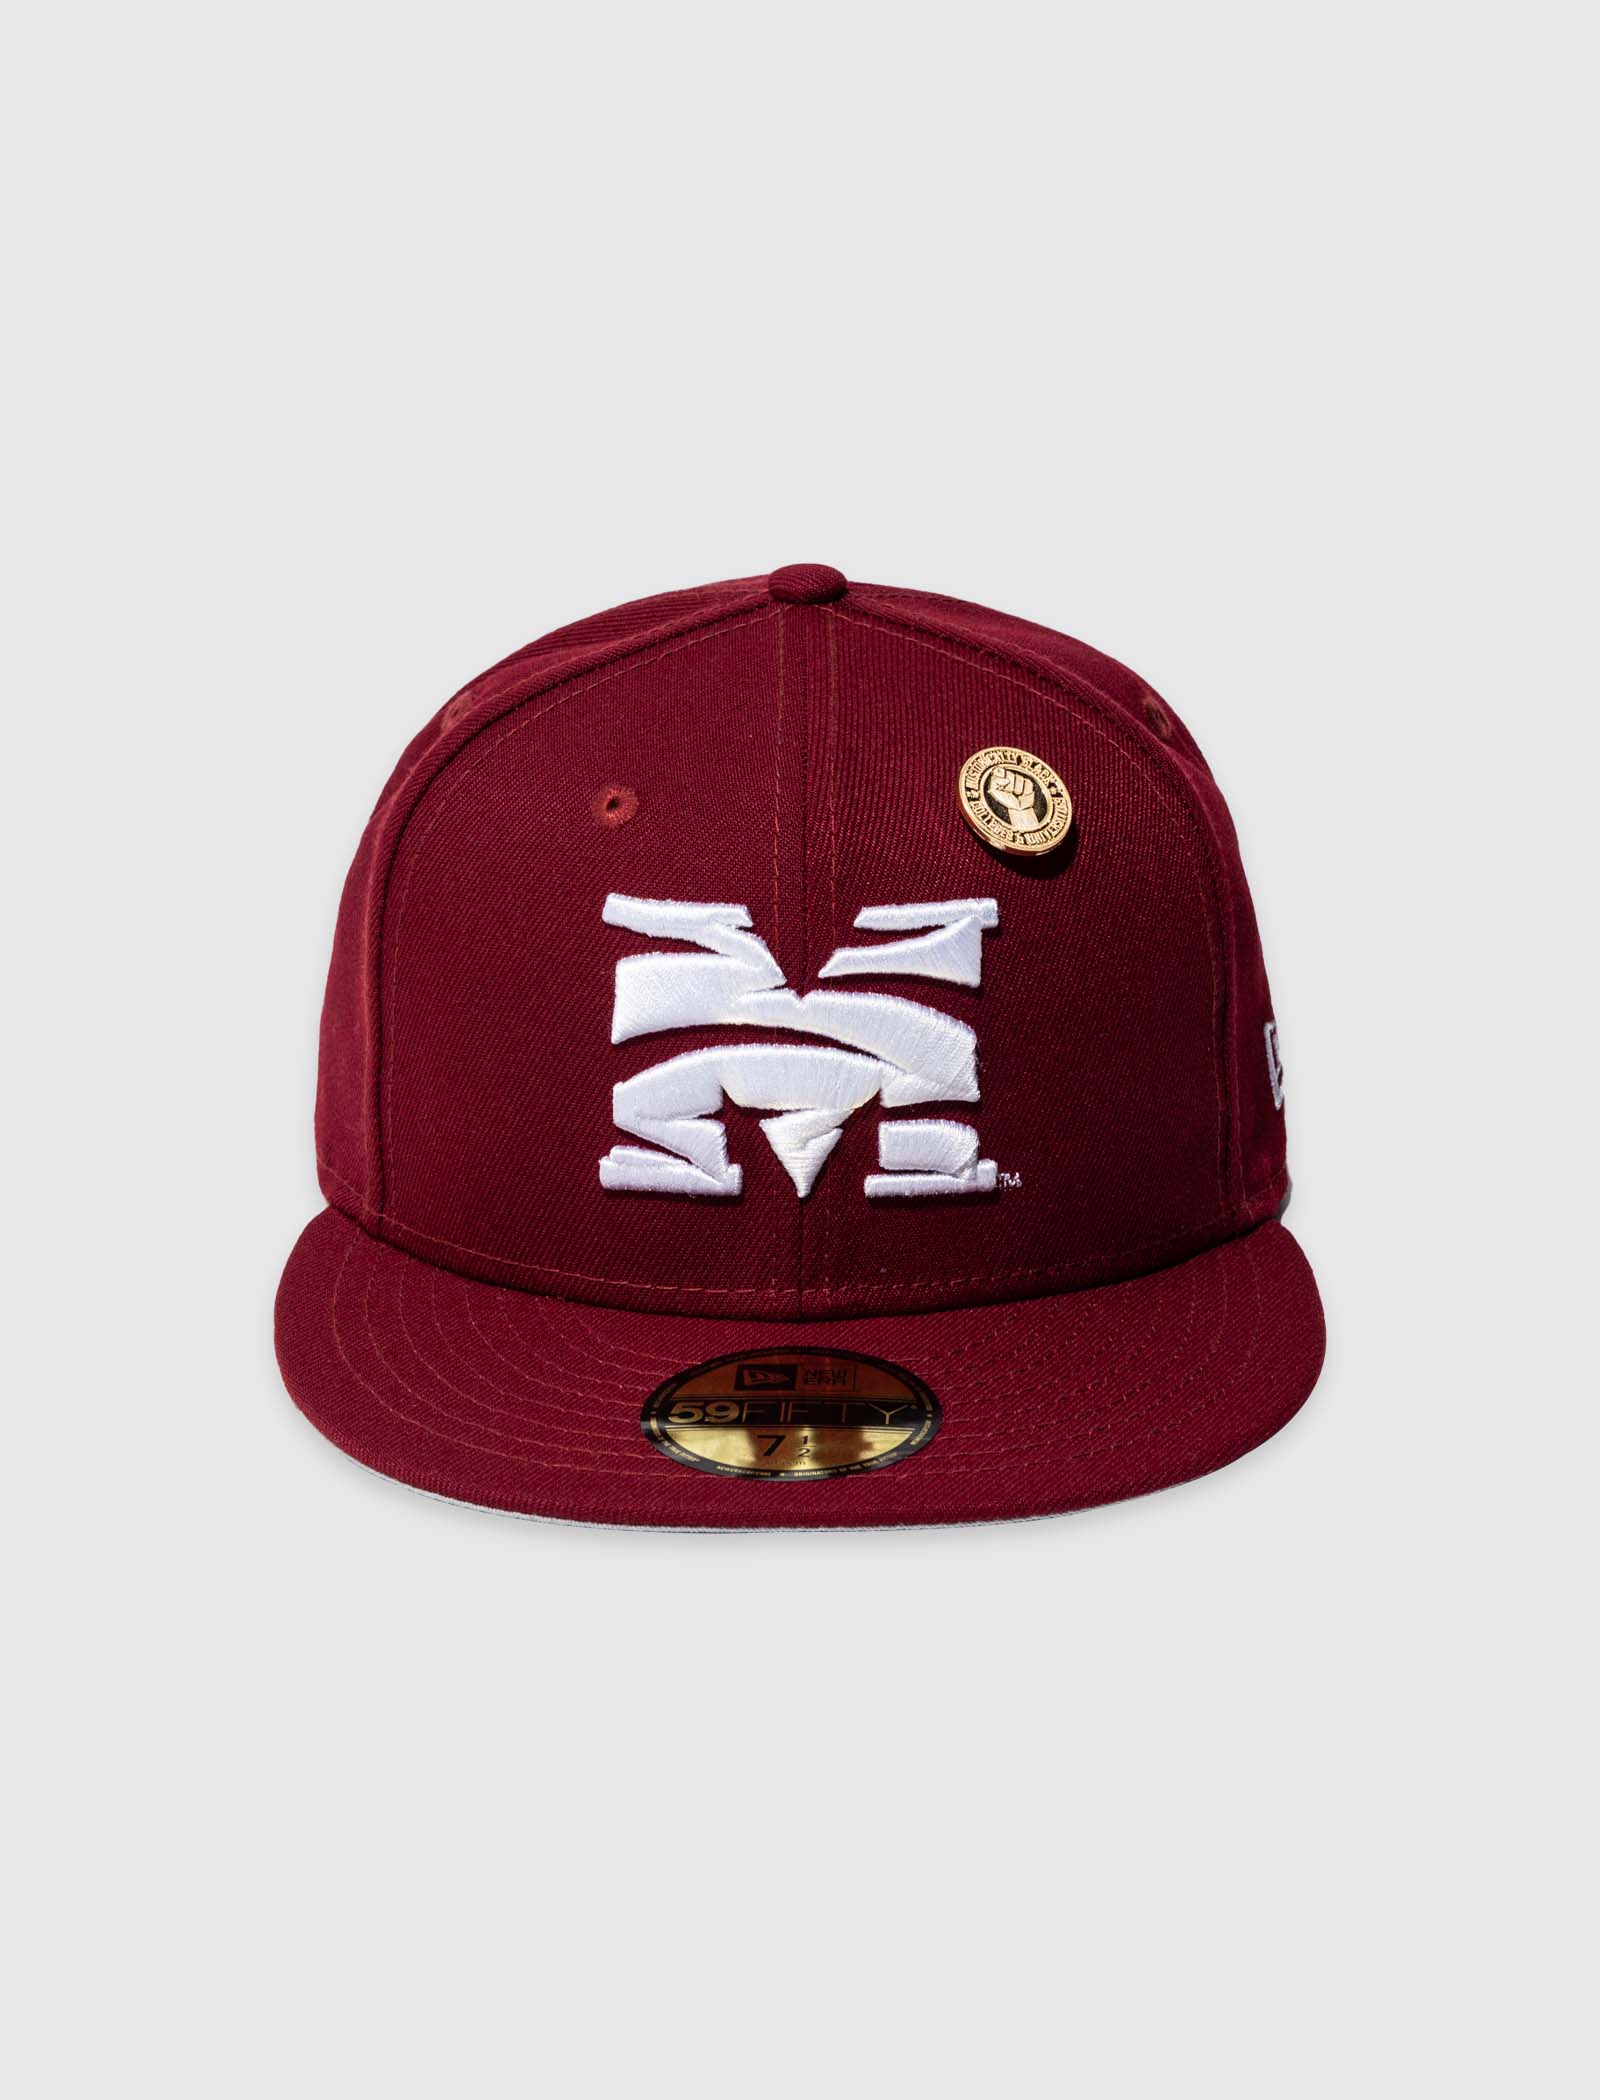 NEW ERA MOREHOUSE TIGERS FITTED HAT